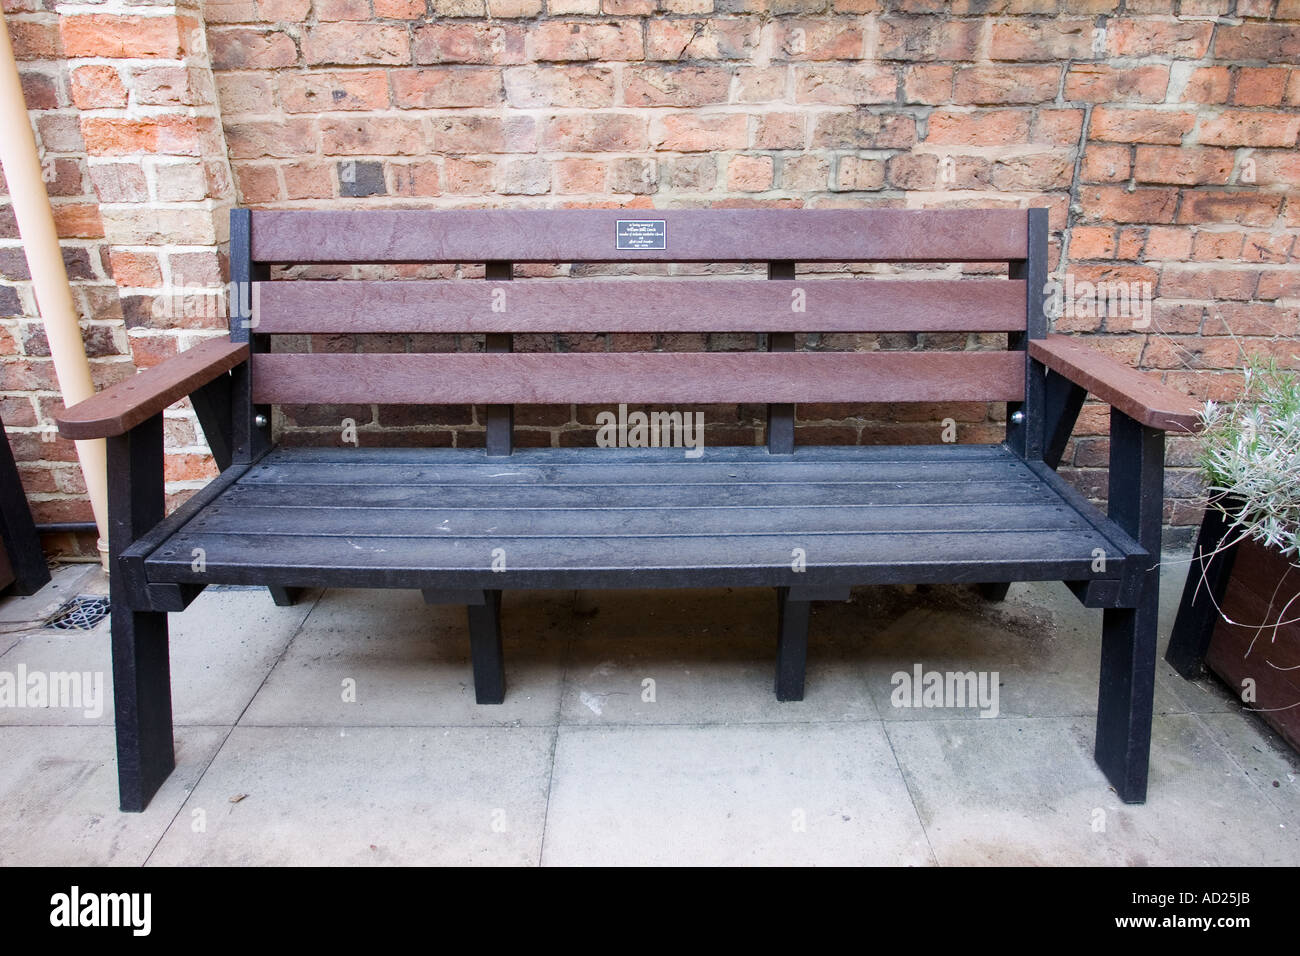 Three seater outdoor park bench  made from plaswood 100% recycled waste plastic, Dumfries, Scotland Stock Photo